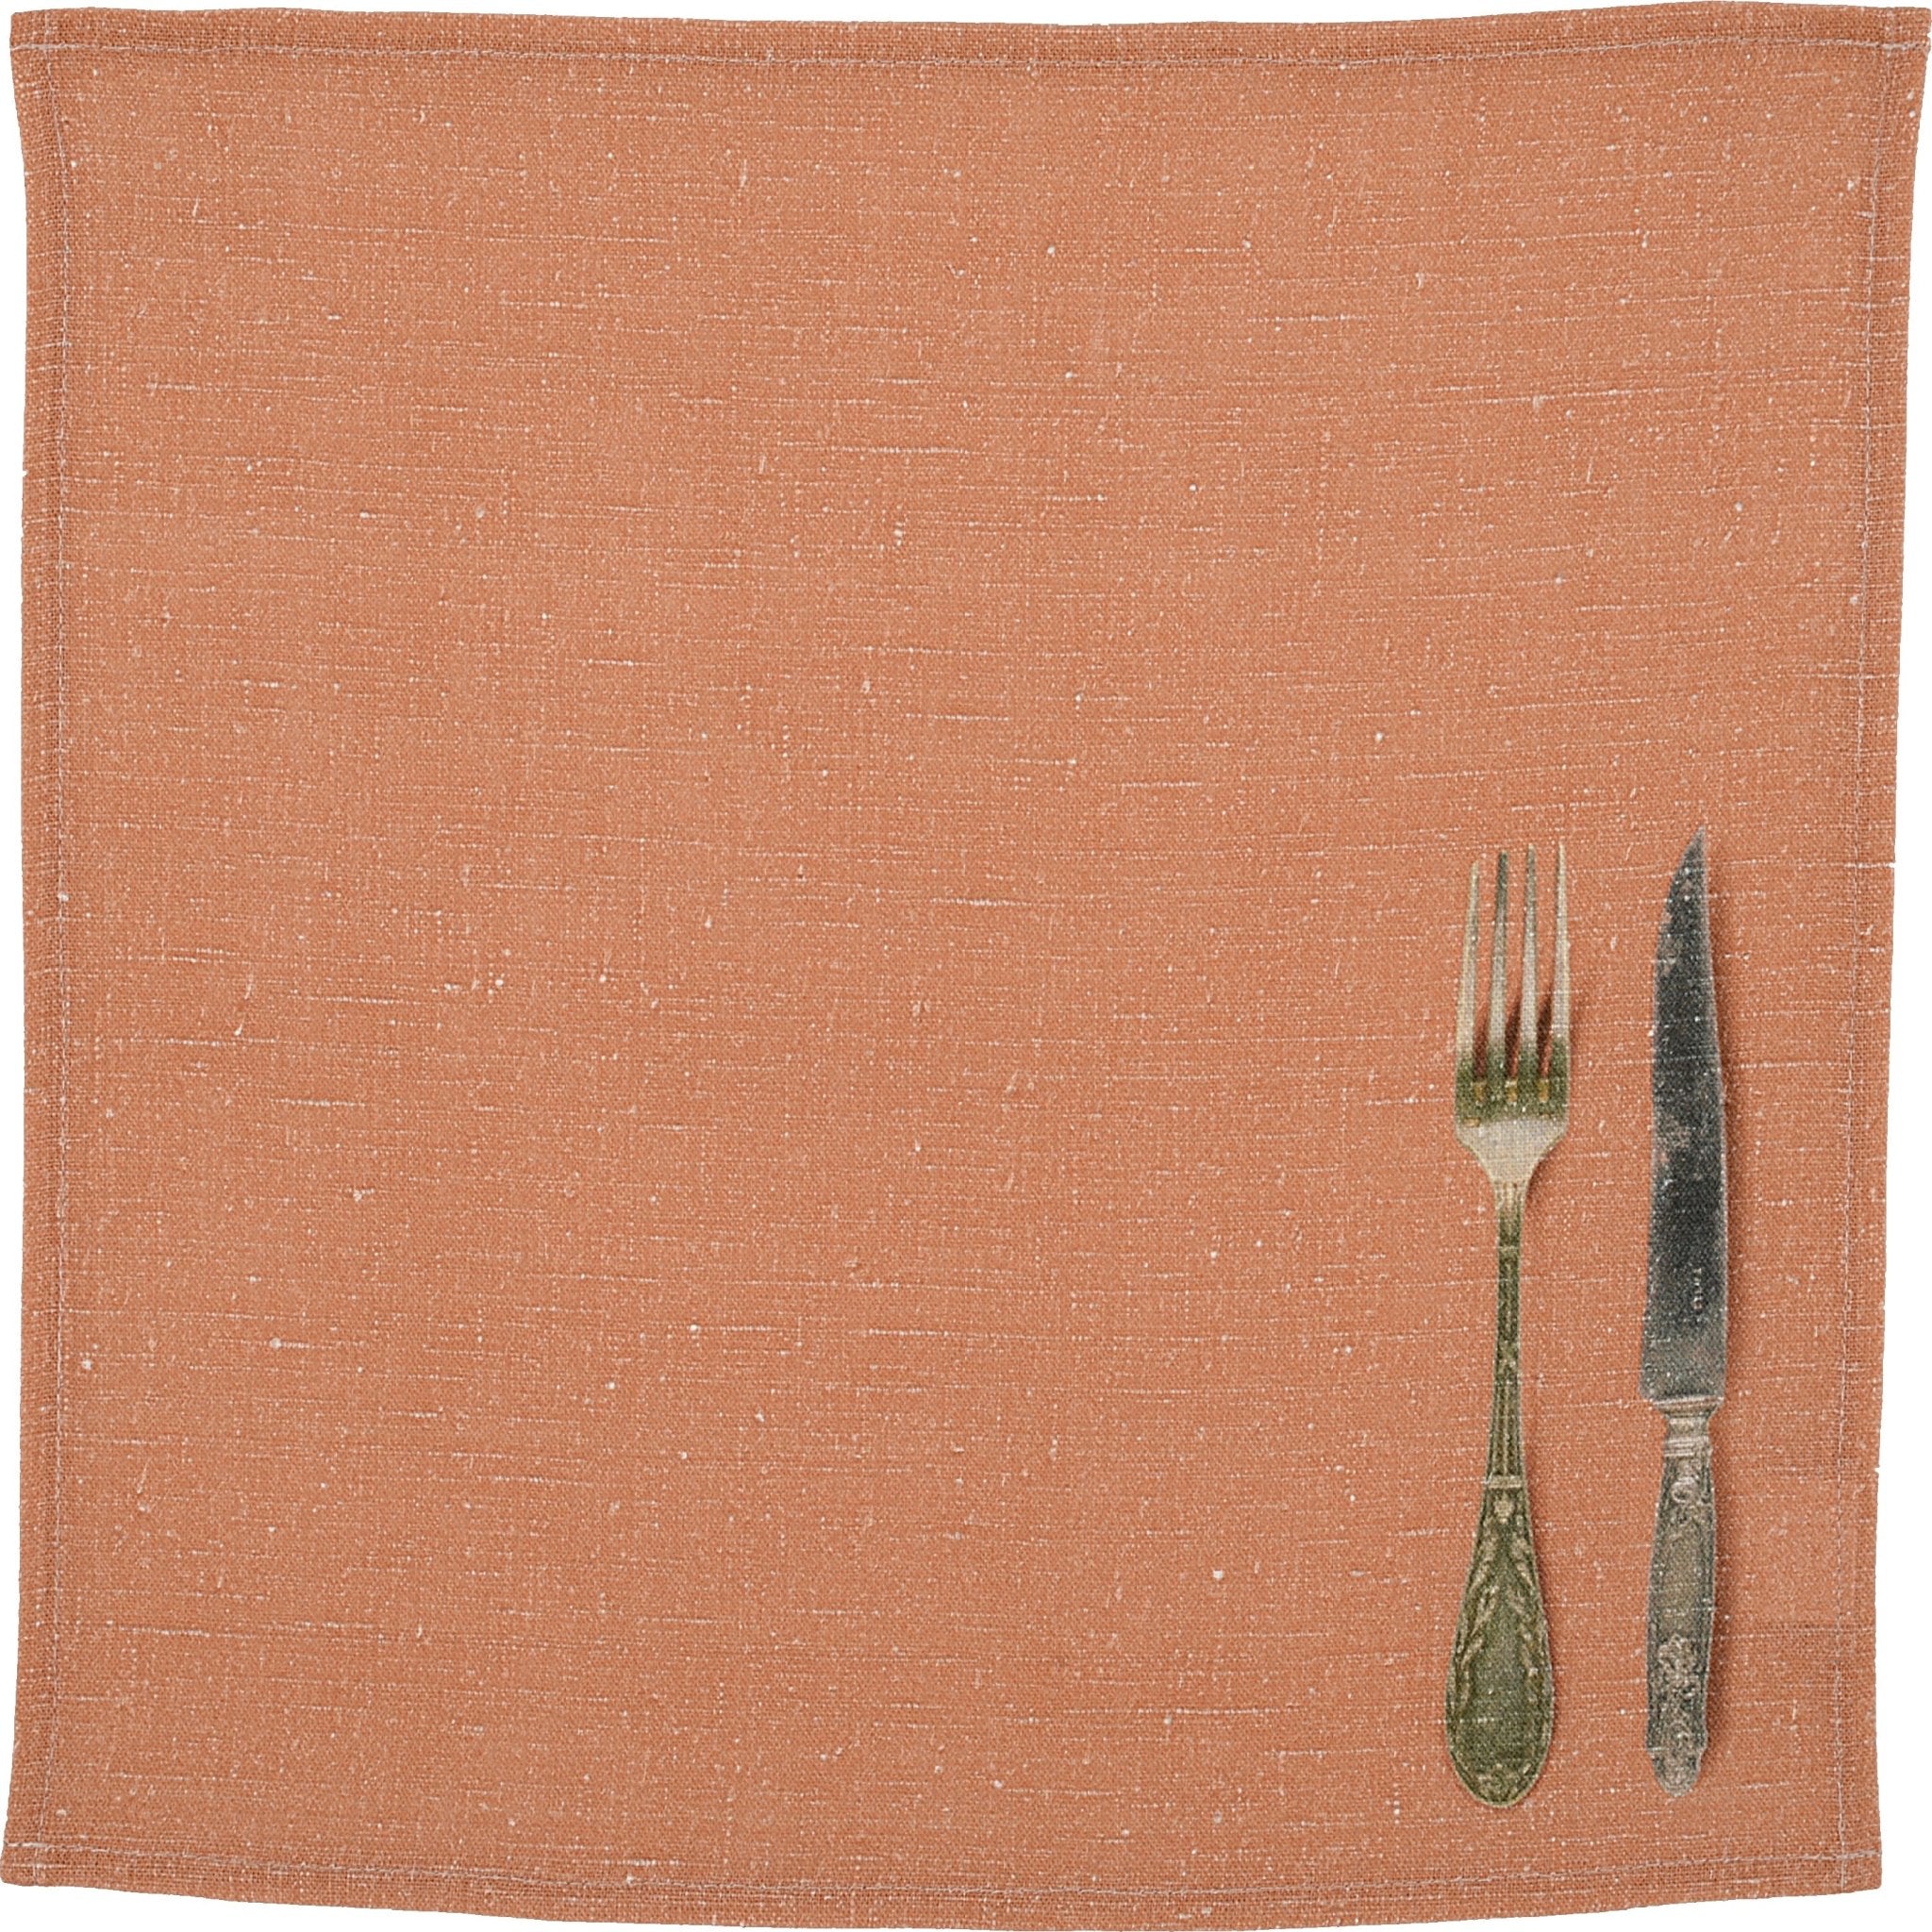 Pair of napkins and Pair of place mats printed with image of antique spoon, fork and knife - Natalia Willmott